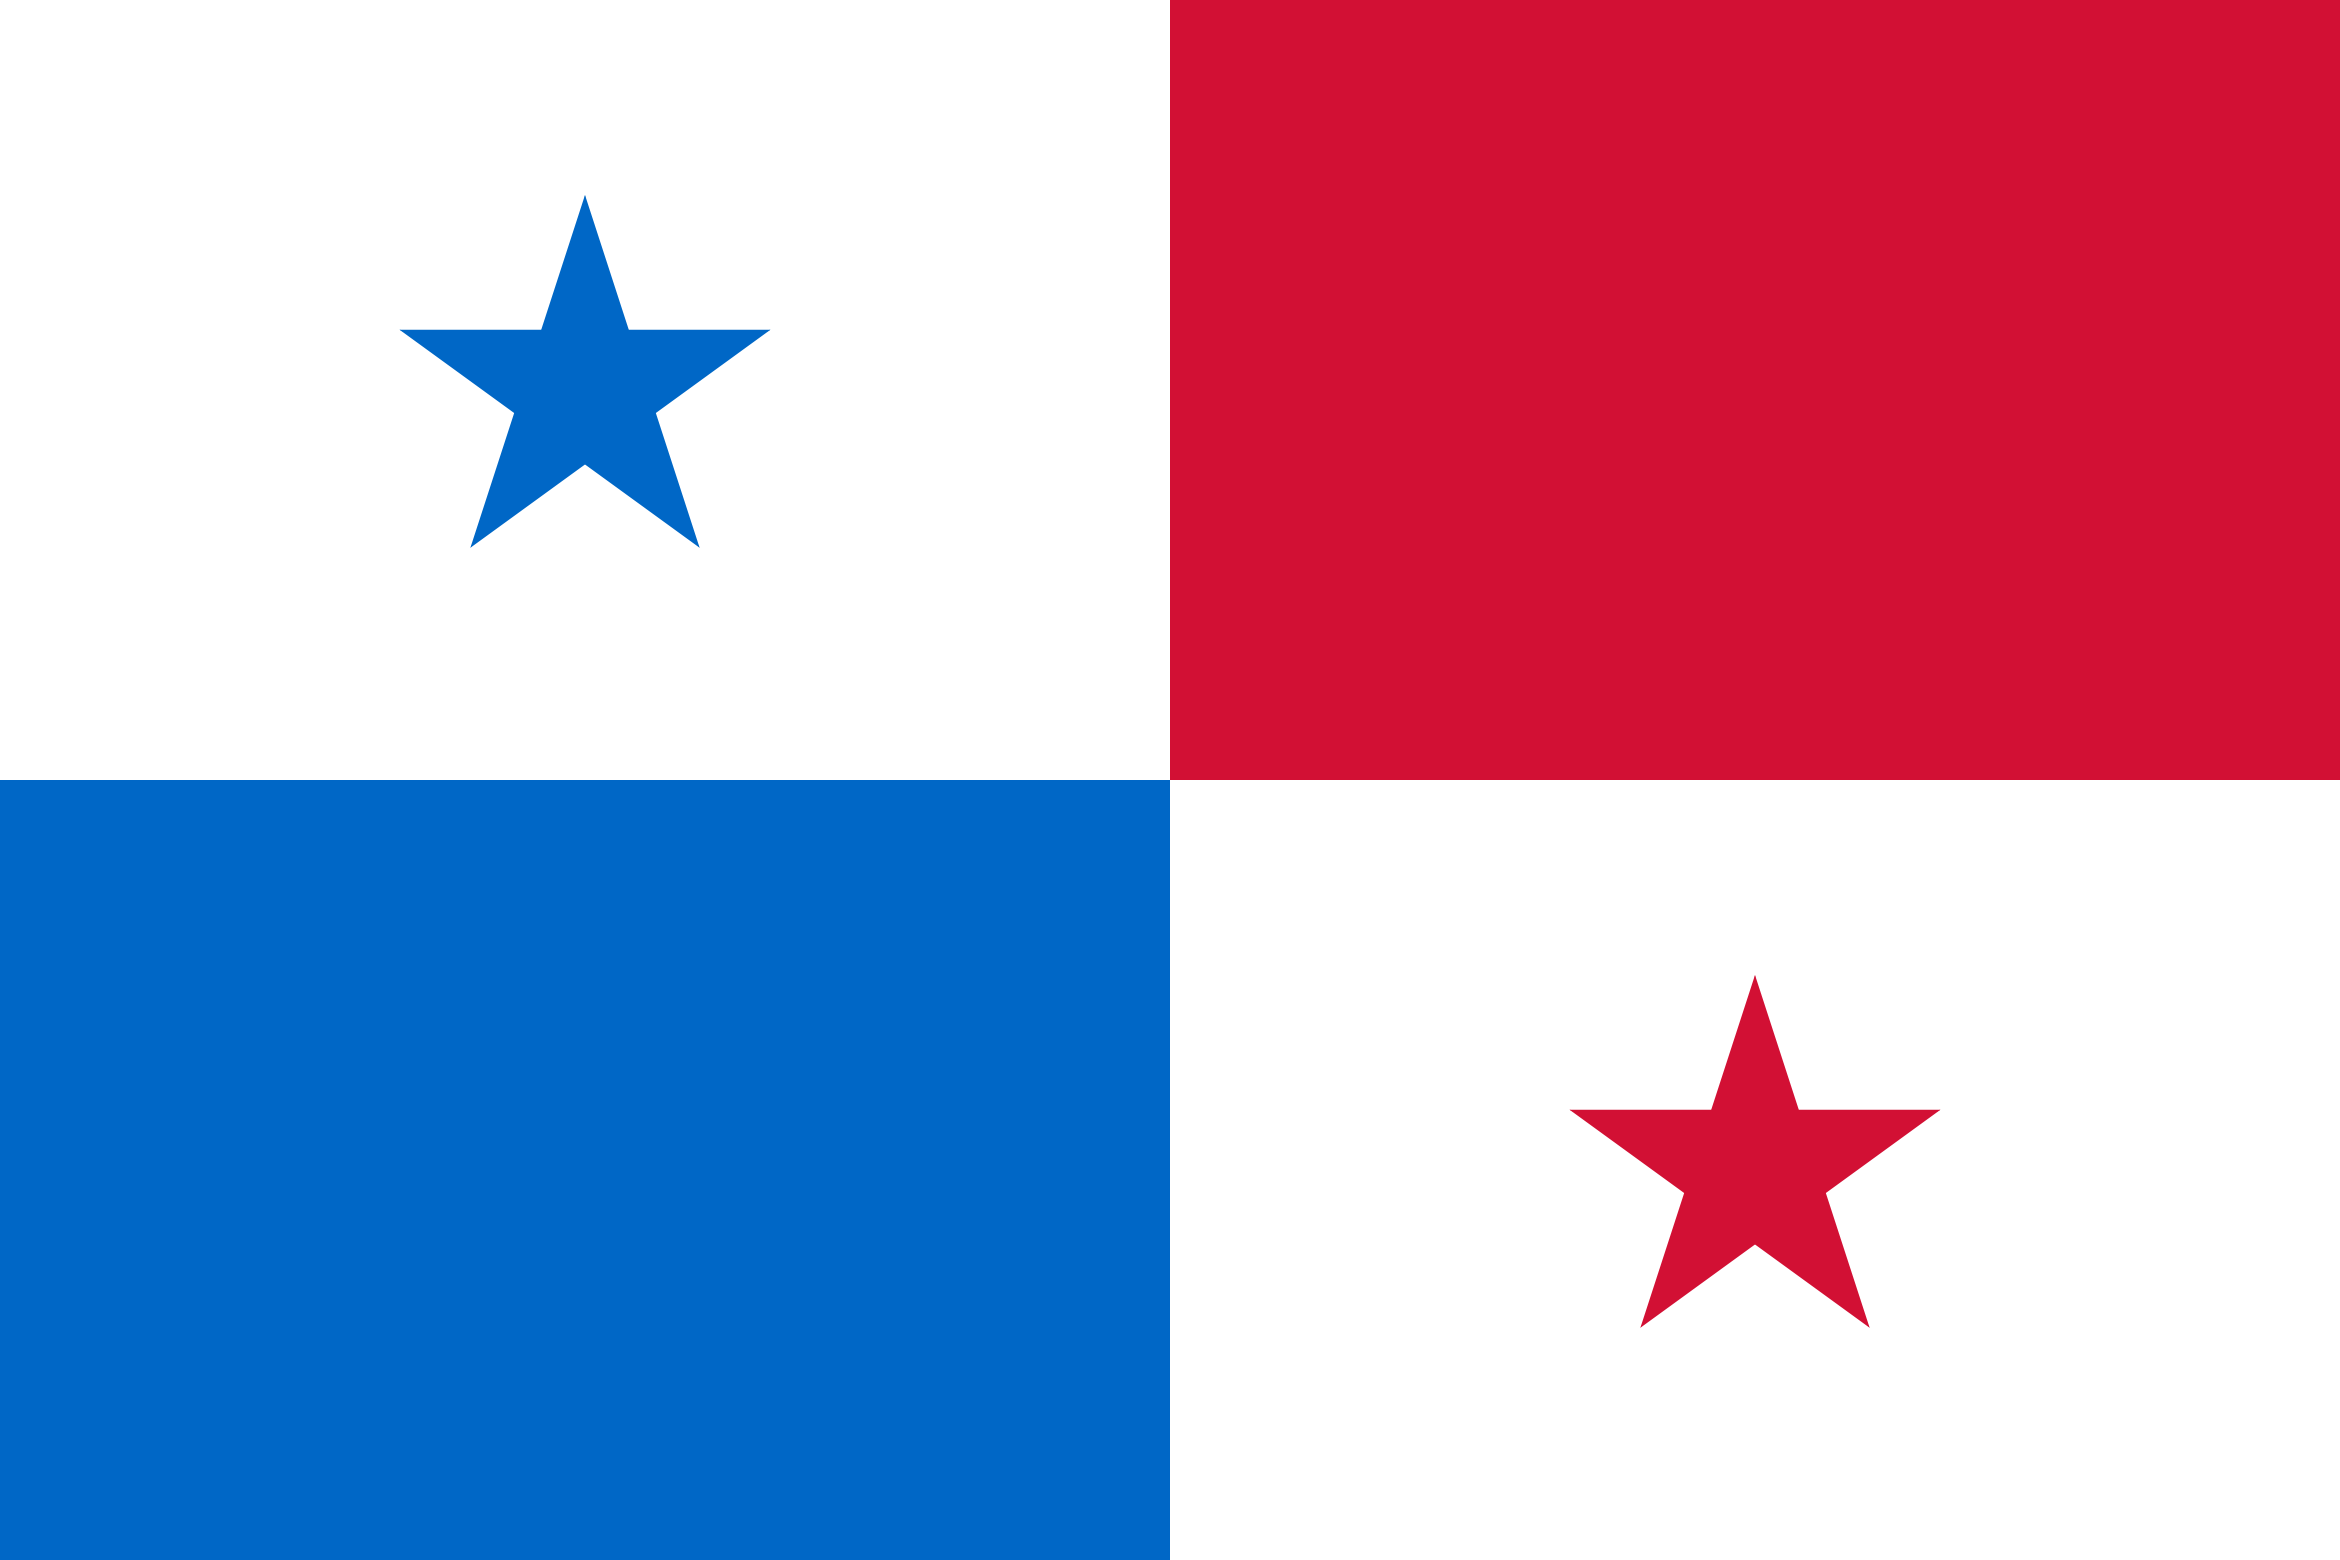 the image shows the panamanian flag